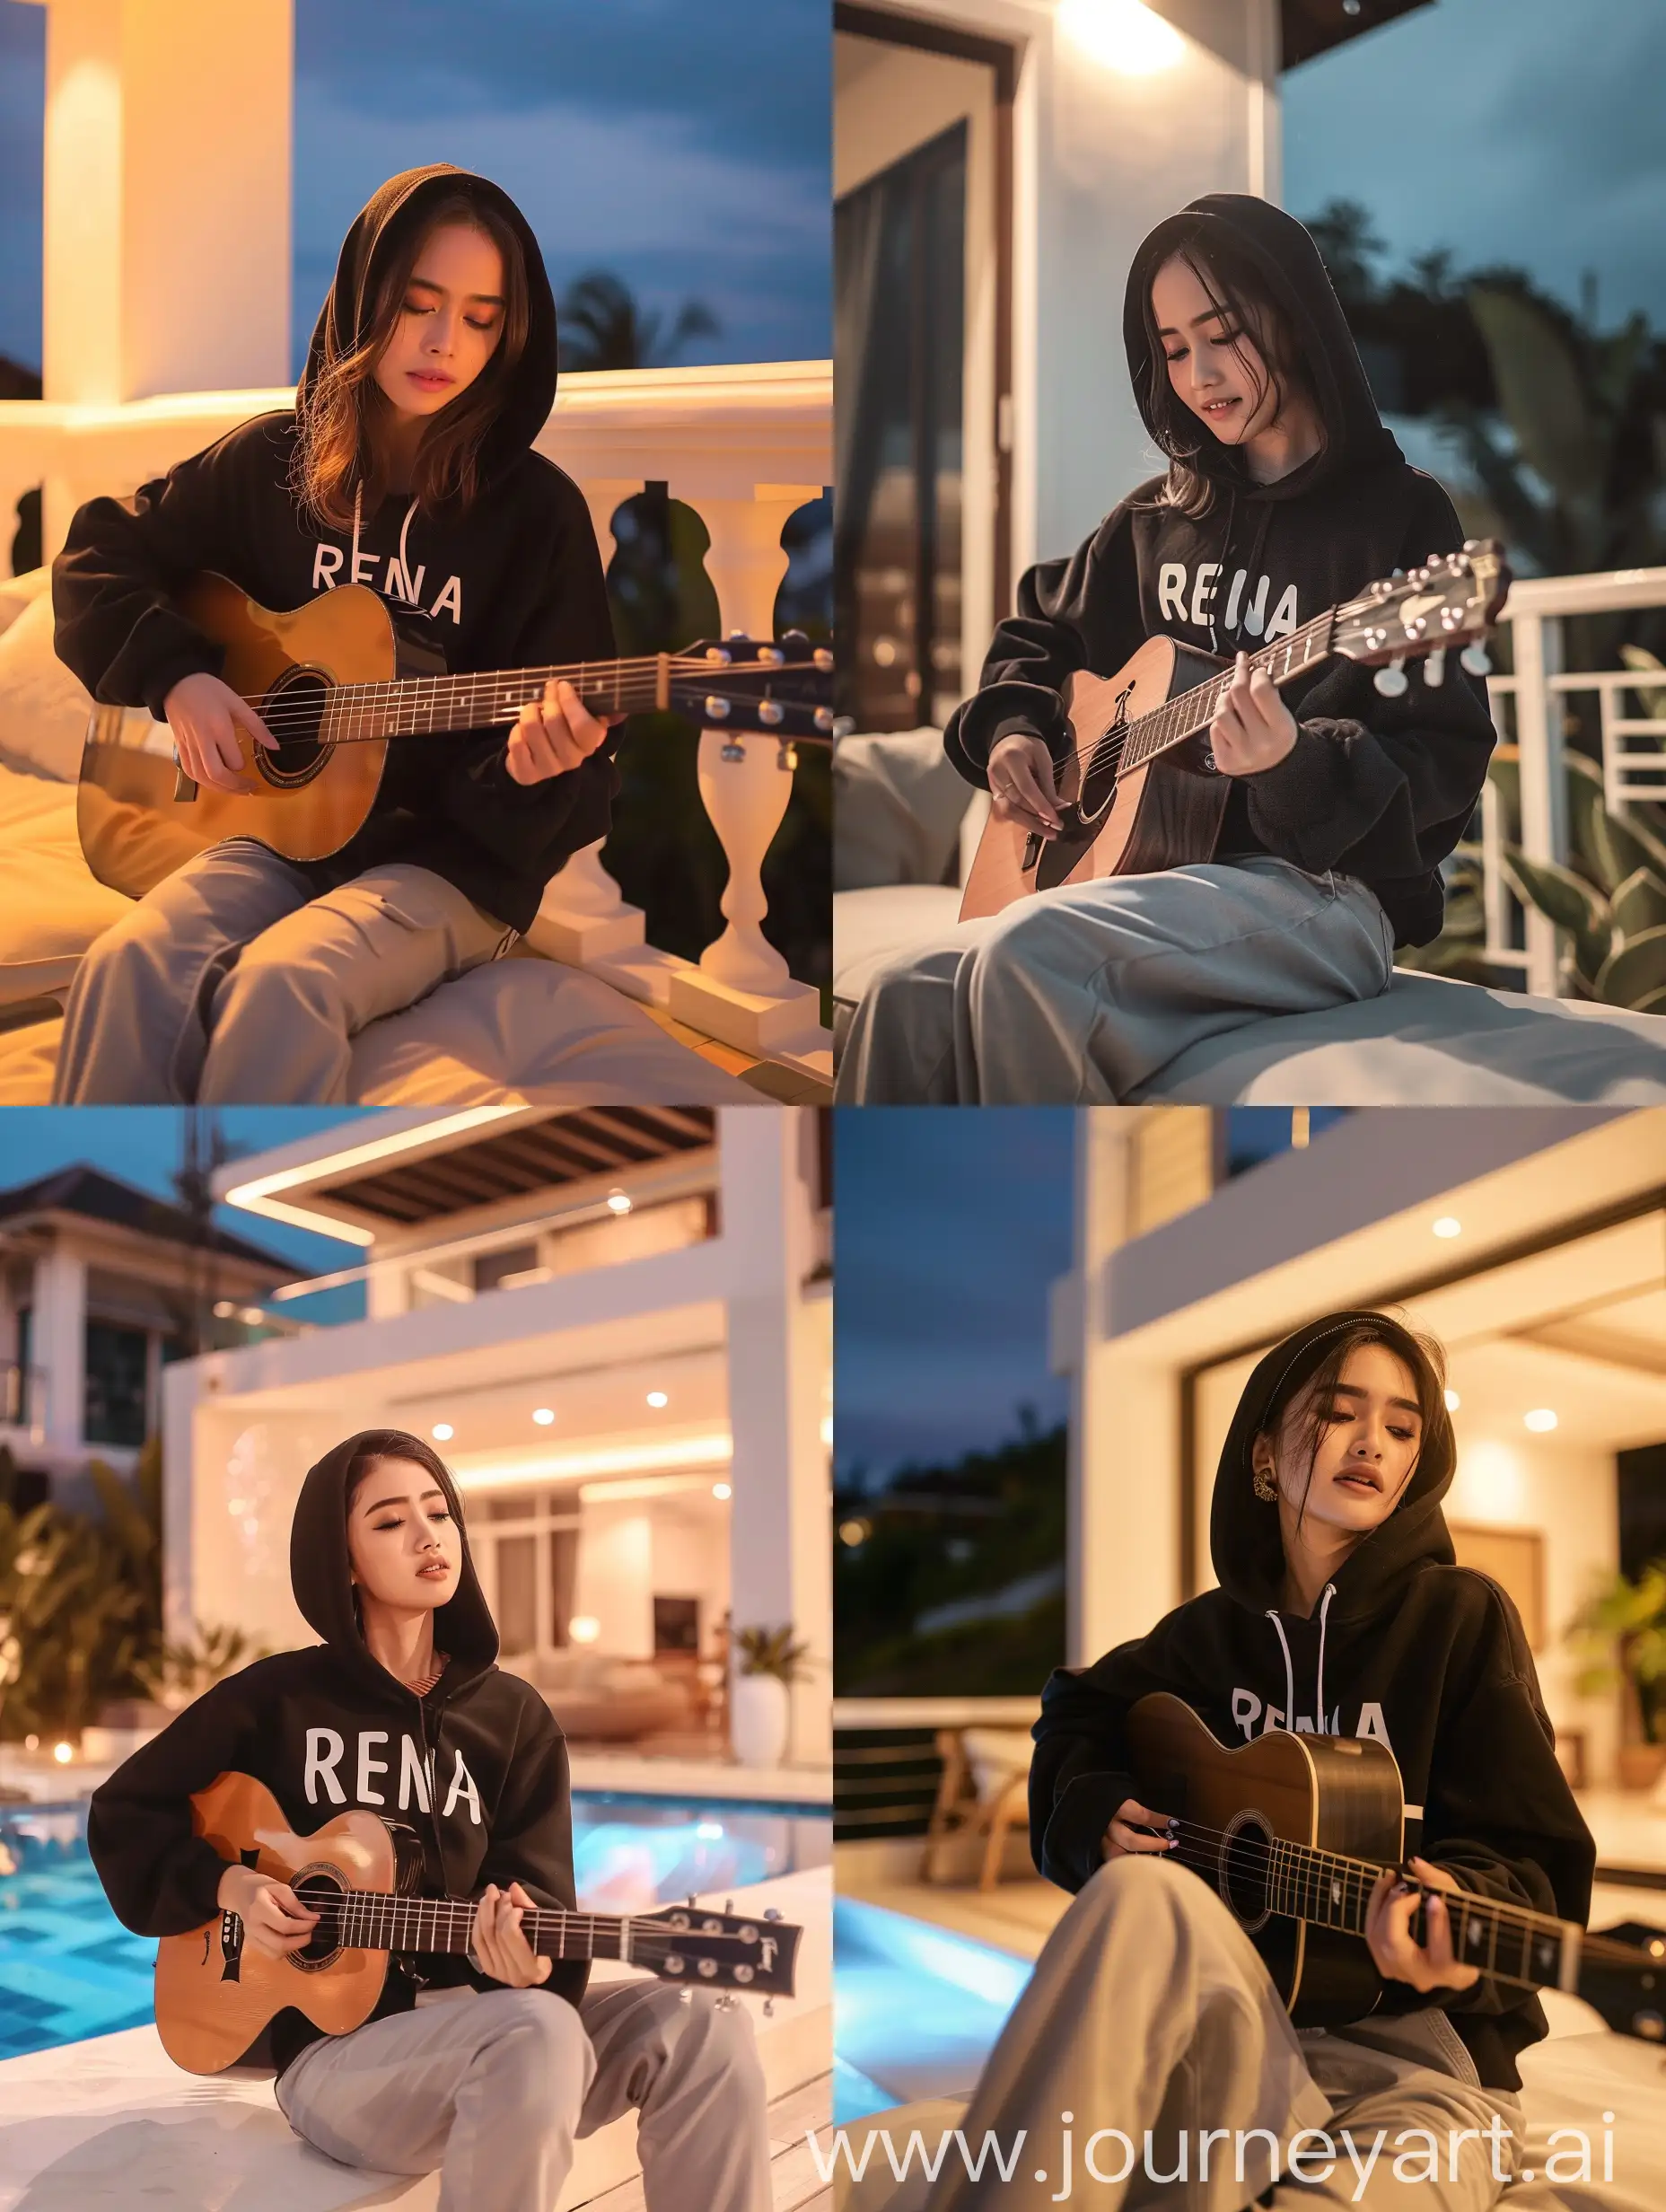 Talented-Indonesian-Woman-Serenades-in-the-Night-with-RENA-Hoodie-and-Guitar